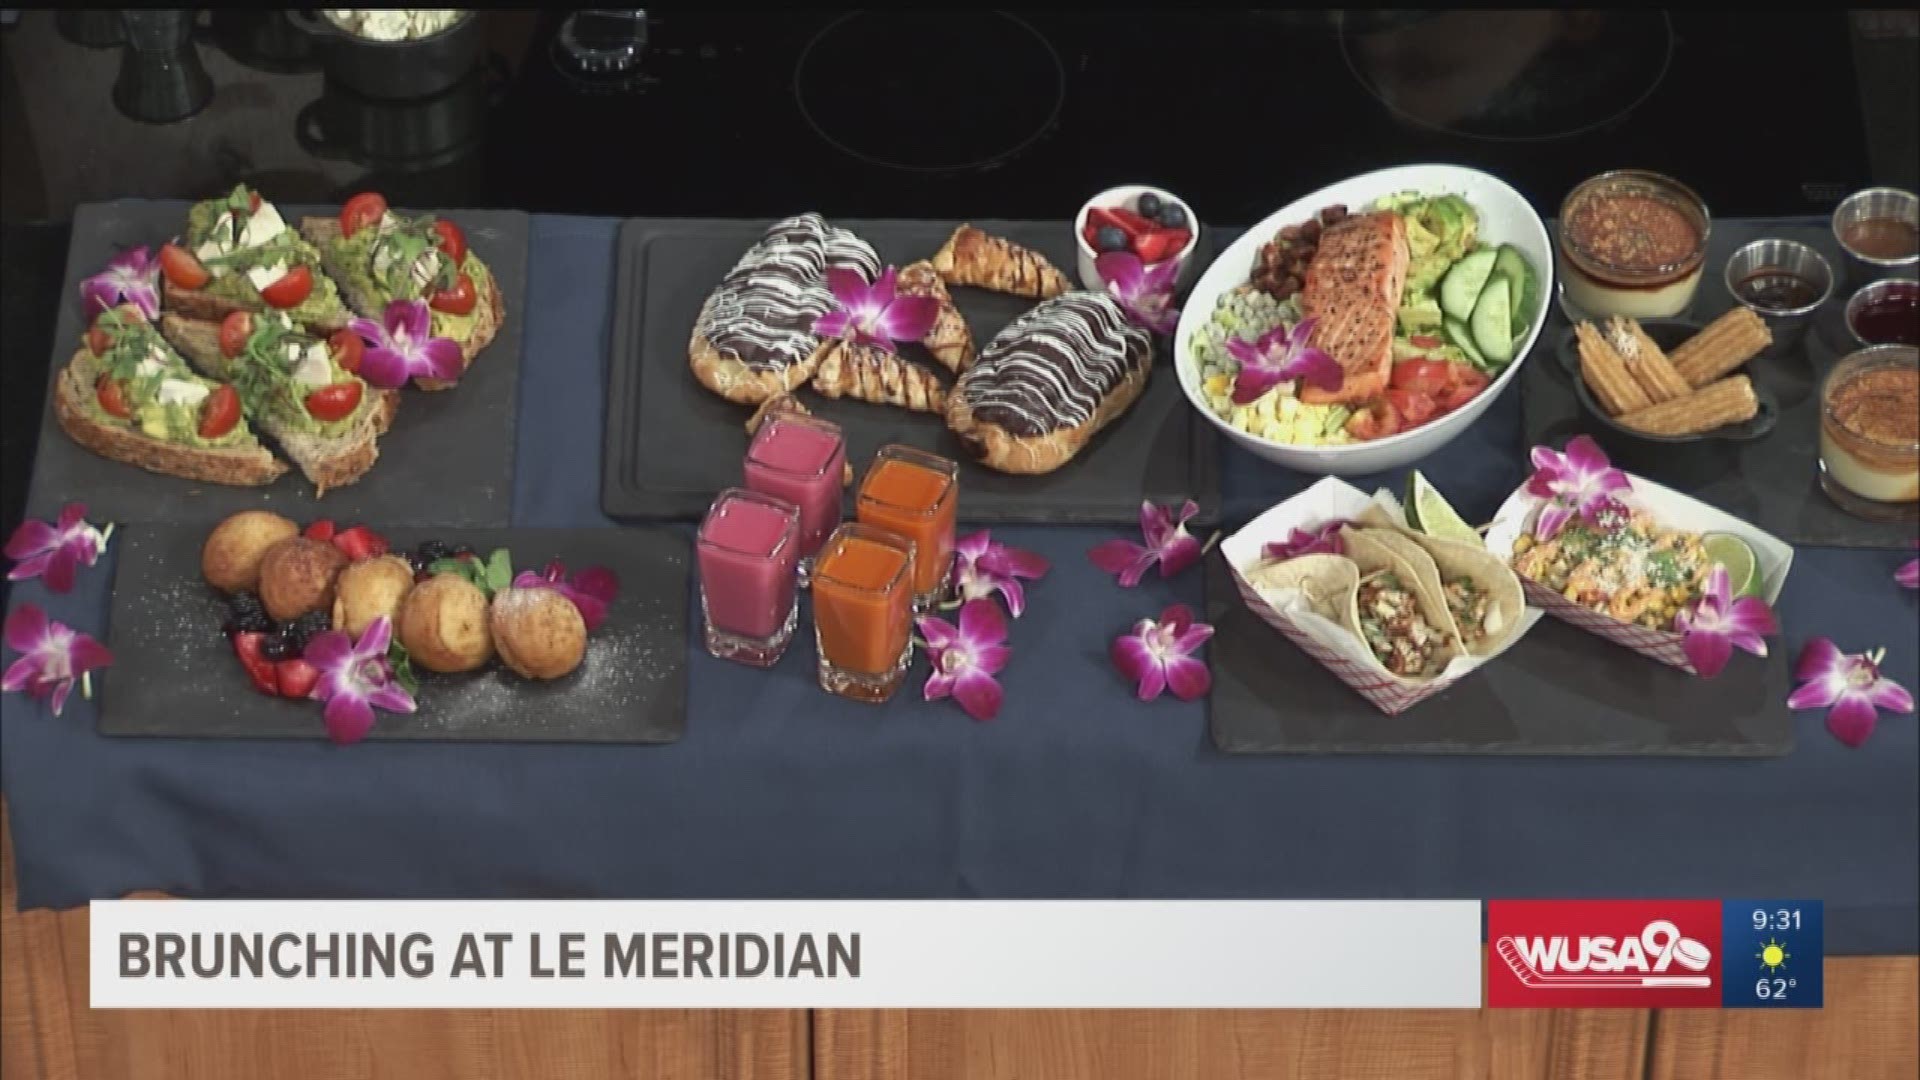 Le Méridien's executive chef, Brent Gauthier, showcases The Yard's gourmet tacos along with some of their brunch items and desserts.